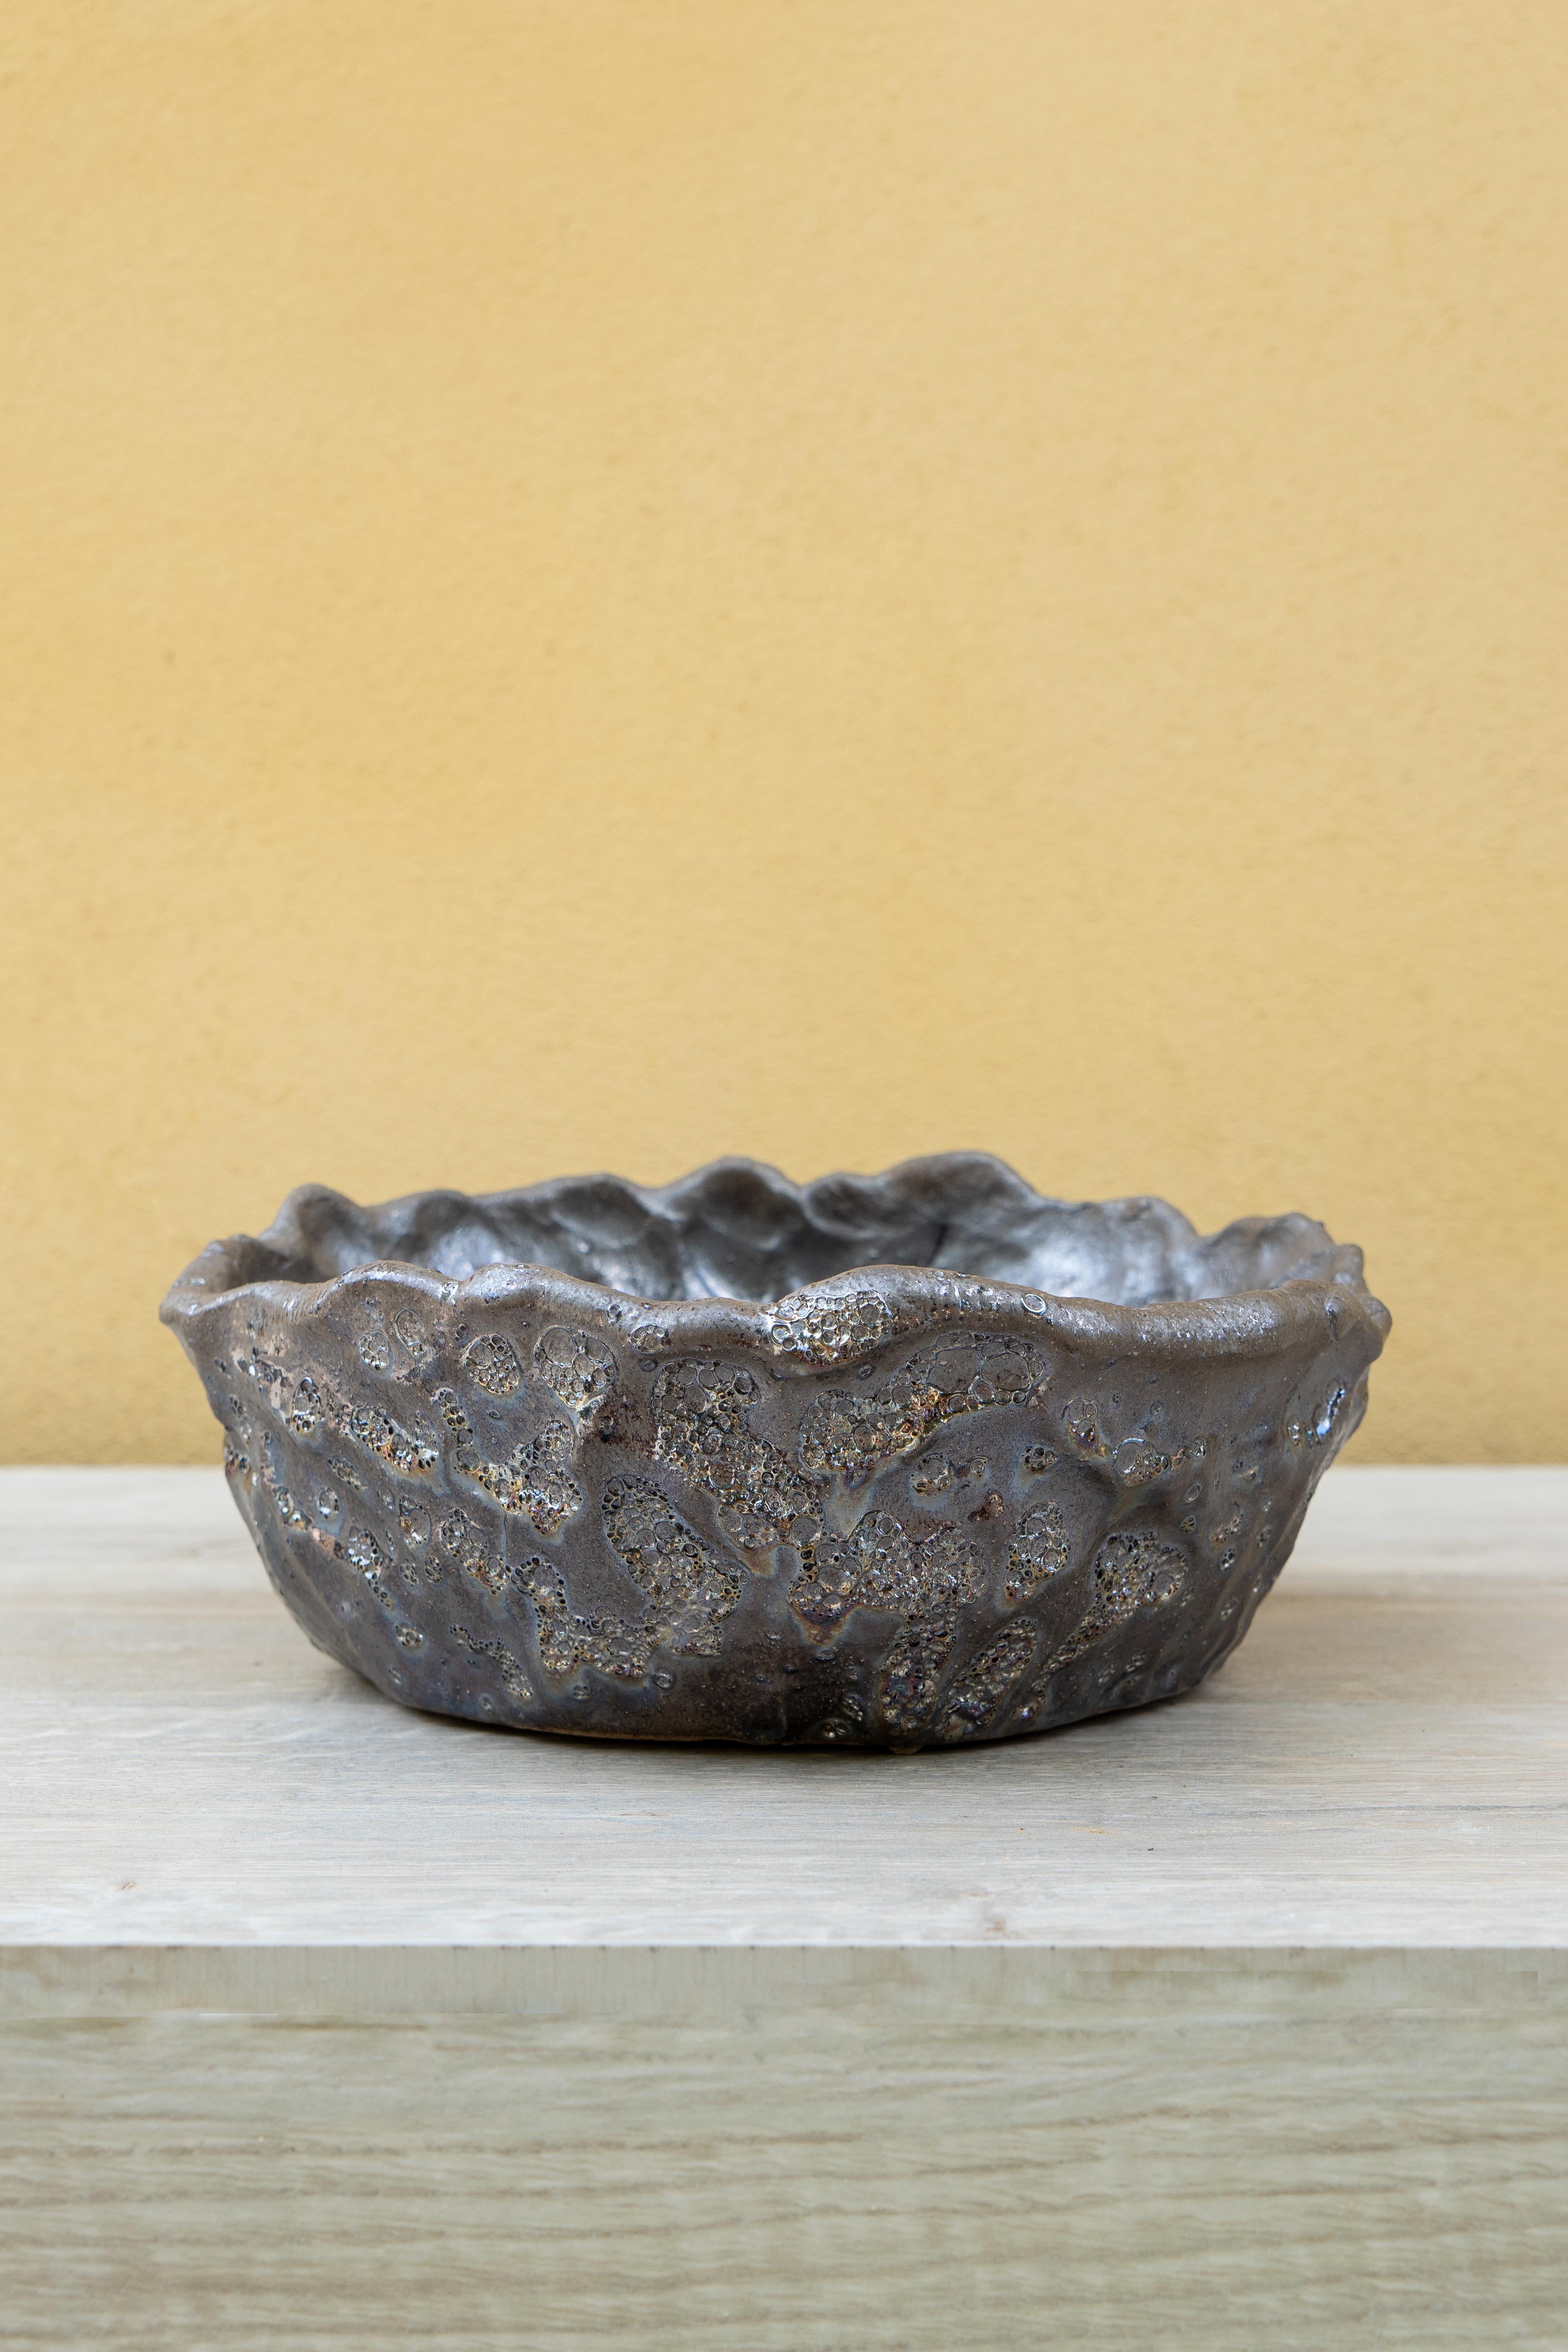 Silver bronze bowl by Daniele Giannetti
Dimensions: Ø 30 x H 12 cm.
Materials: Glazed terracotta.

All pieces are made in terracotta from Montelupo, only fired once, then colored by Daniele Giannetti with a white acrylic base, and then a mixture